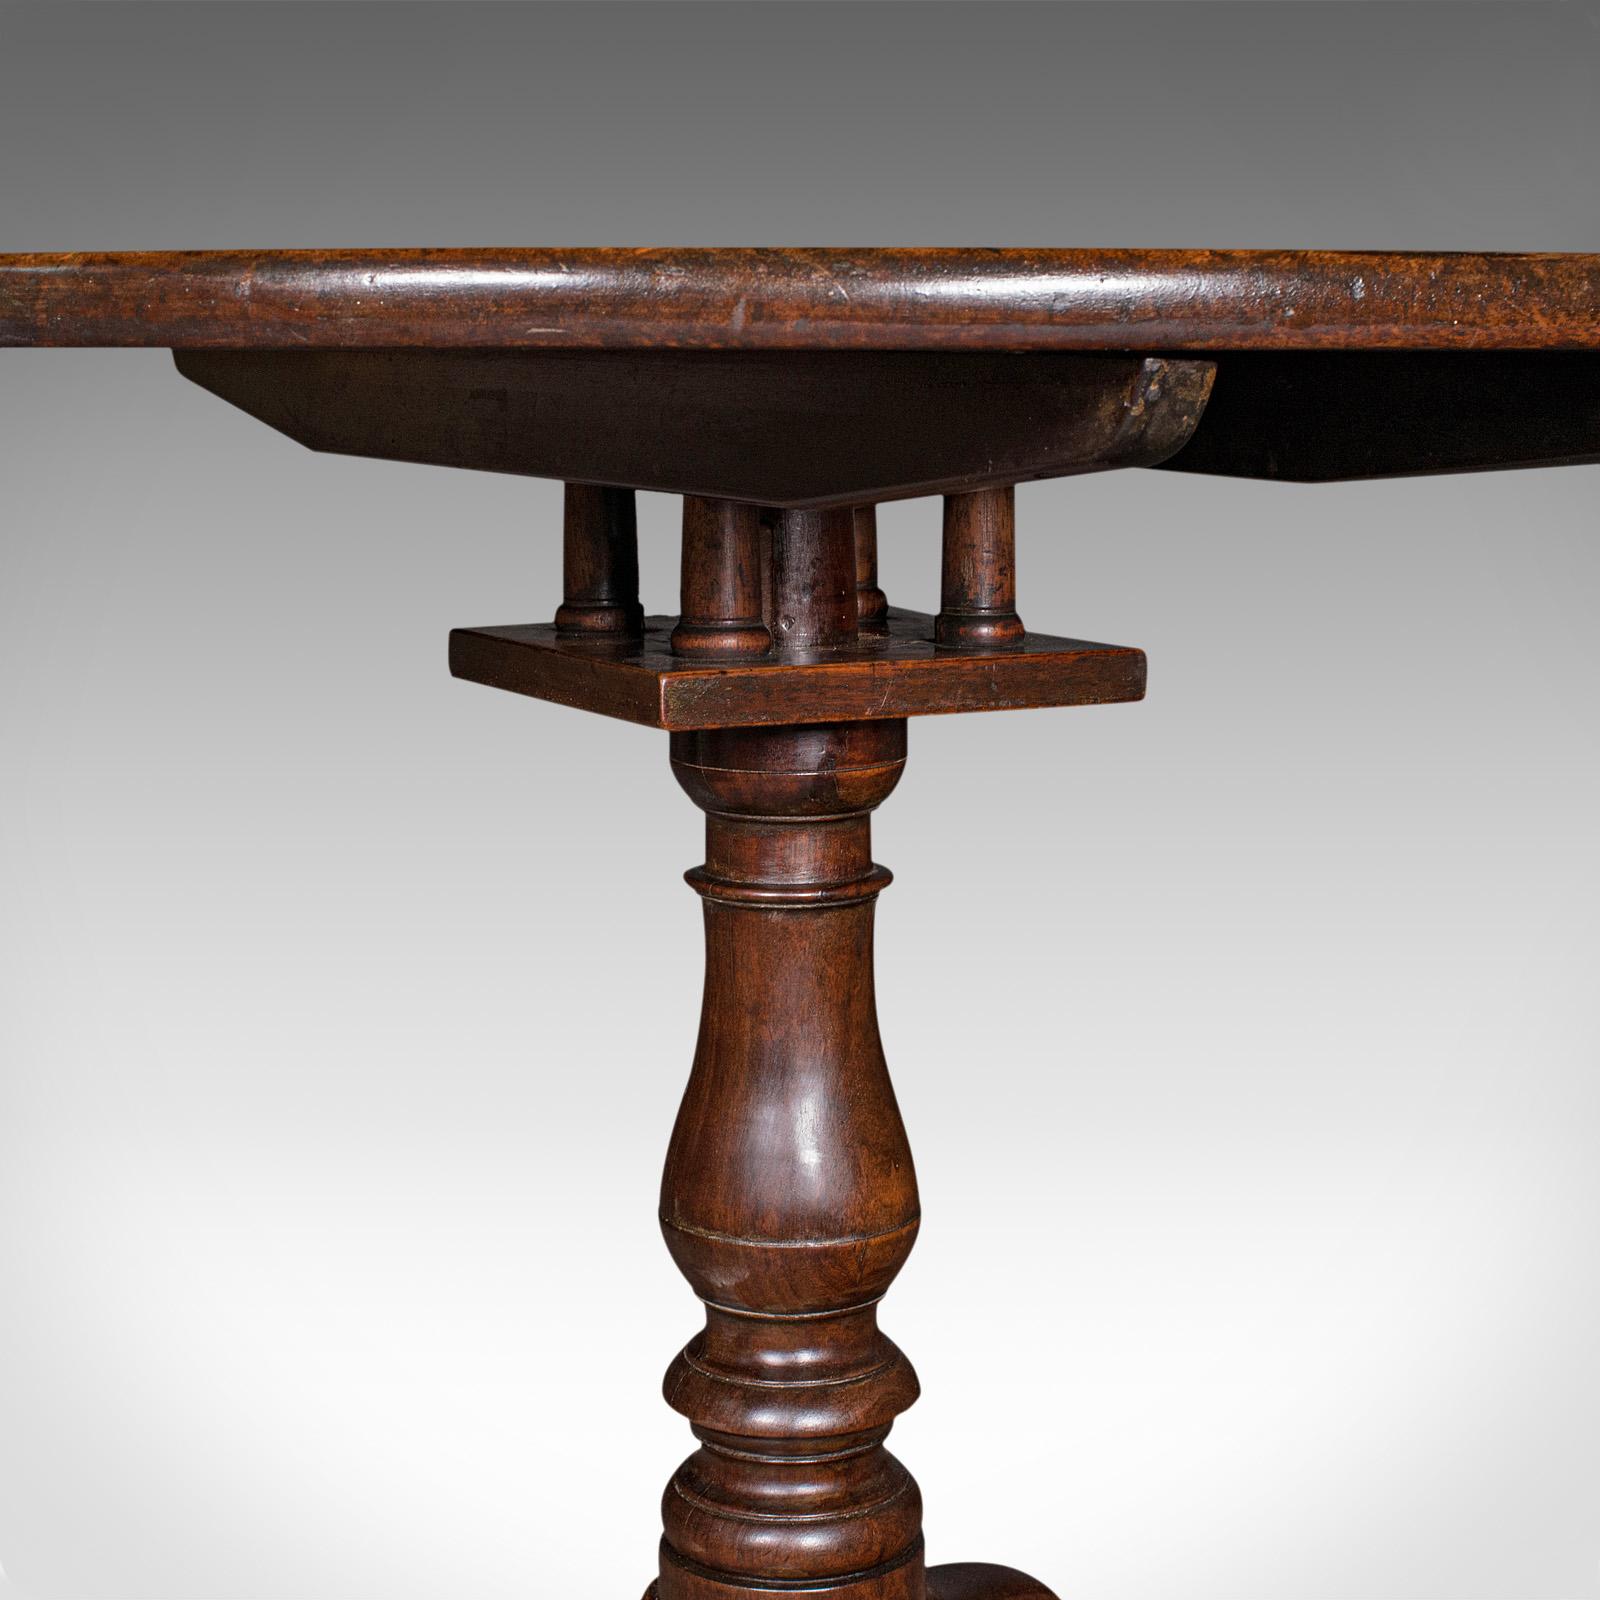 Antique Occasional Table, English, Tilt Top, Lamp, Afternoon Tea, Georgian, 1800 For Sale 5